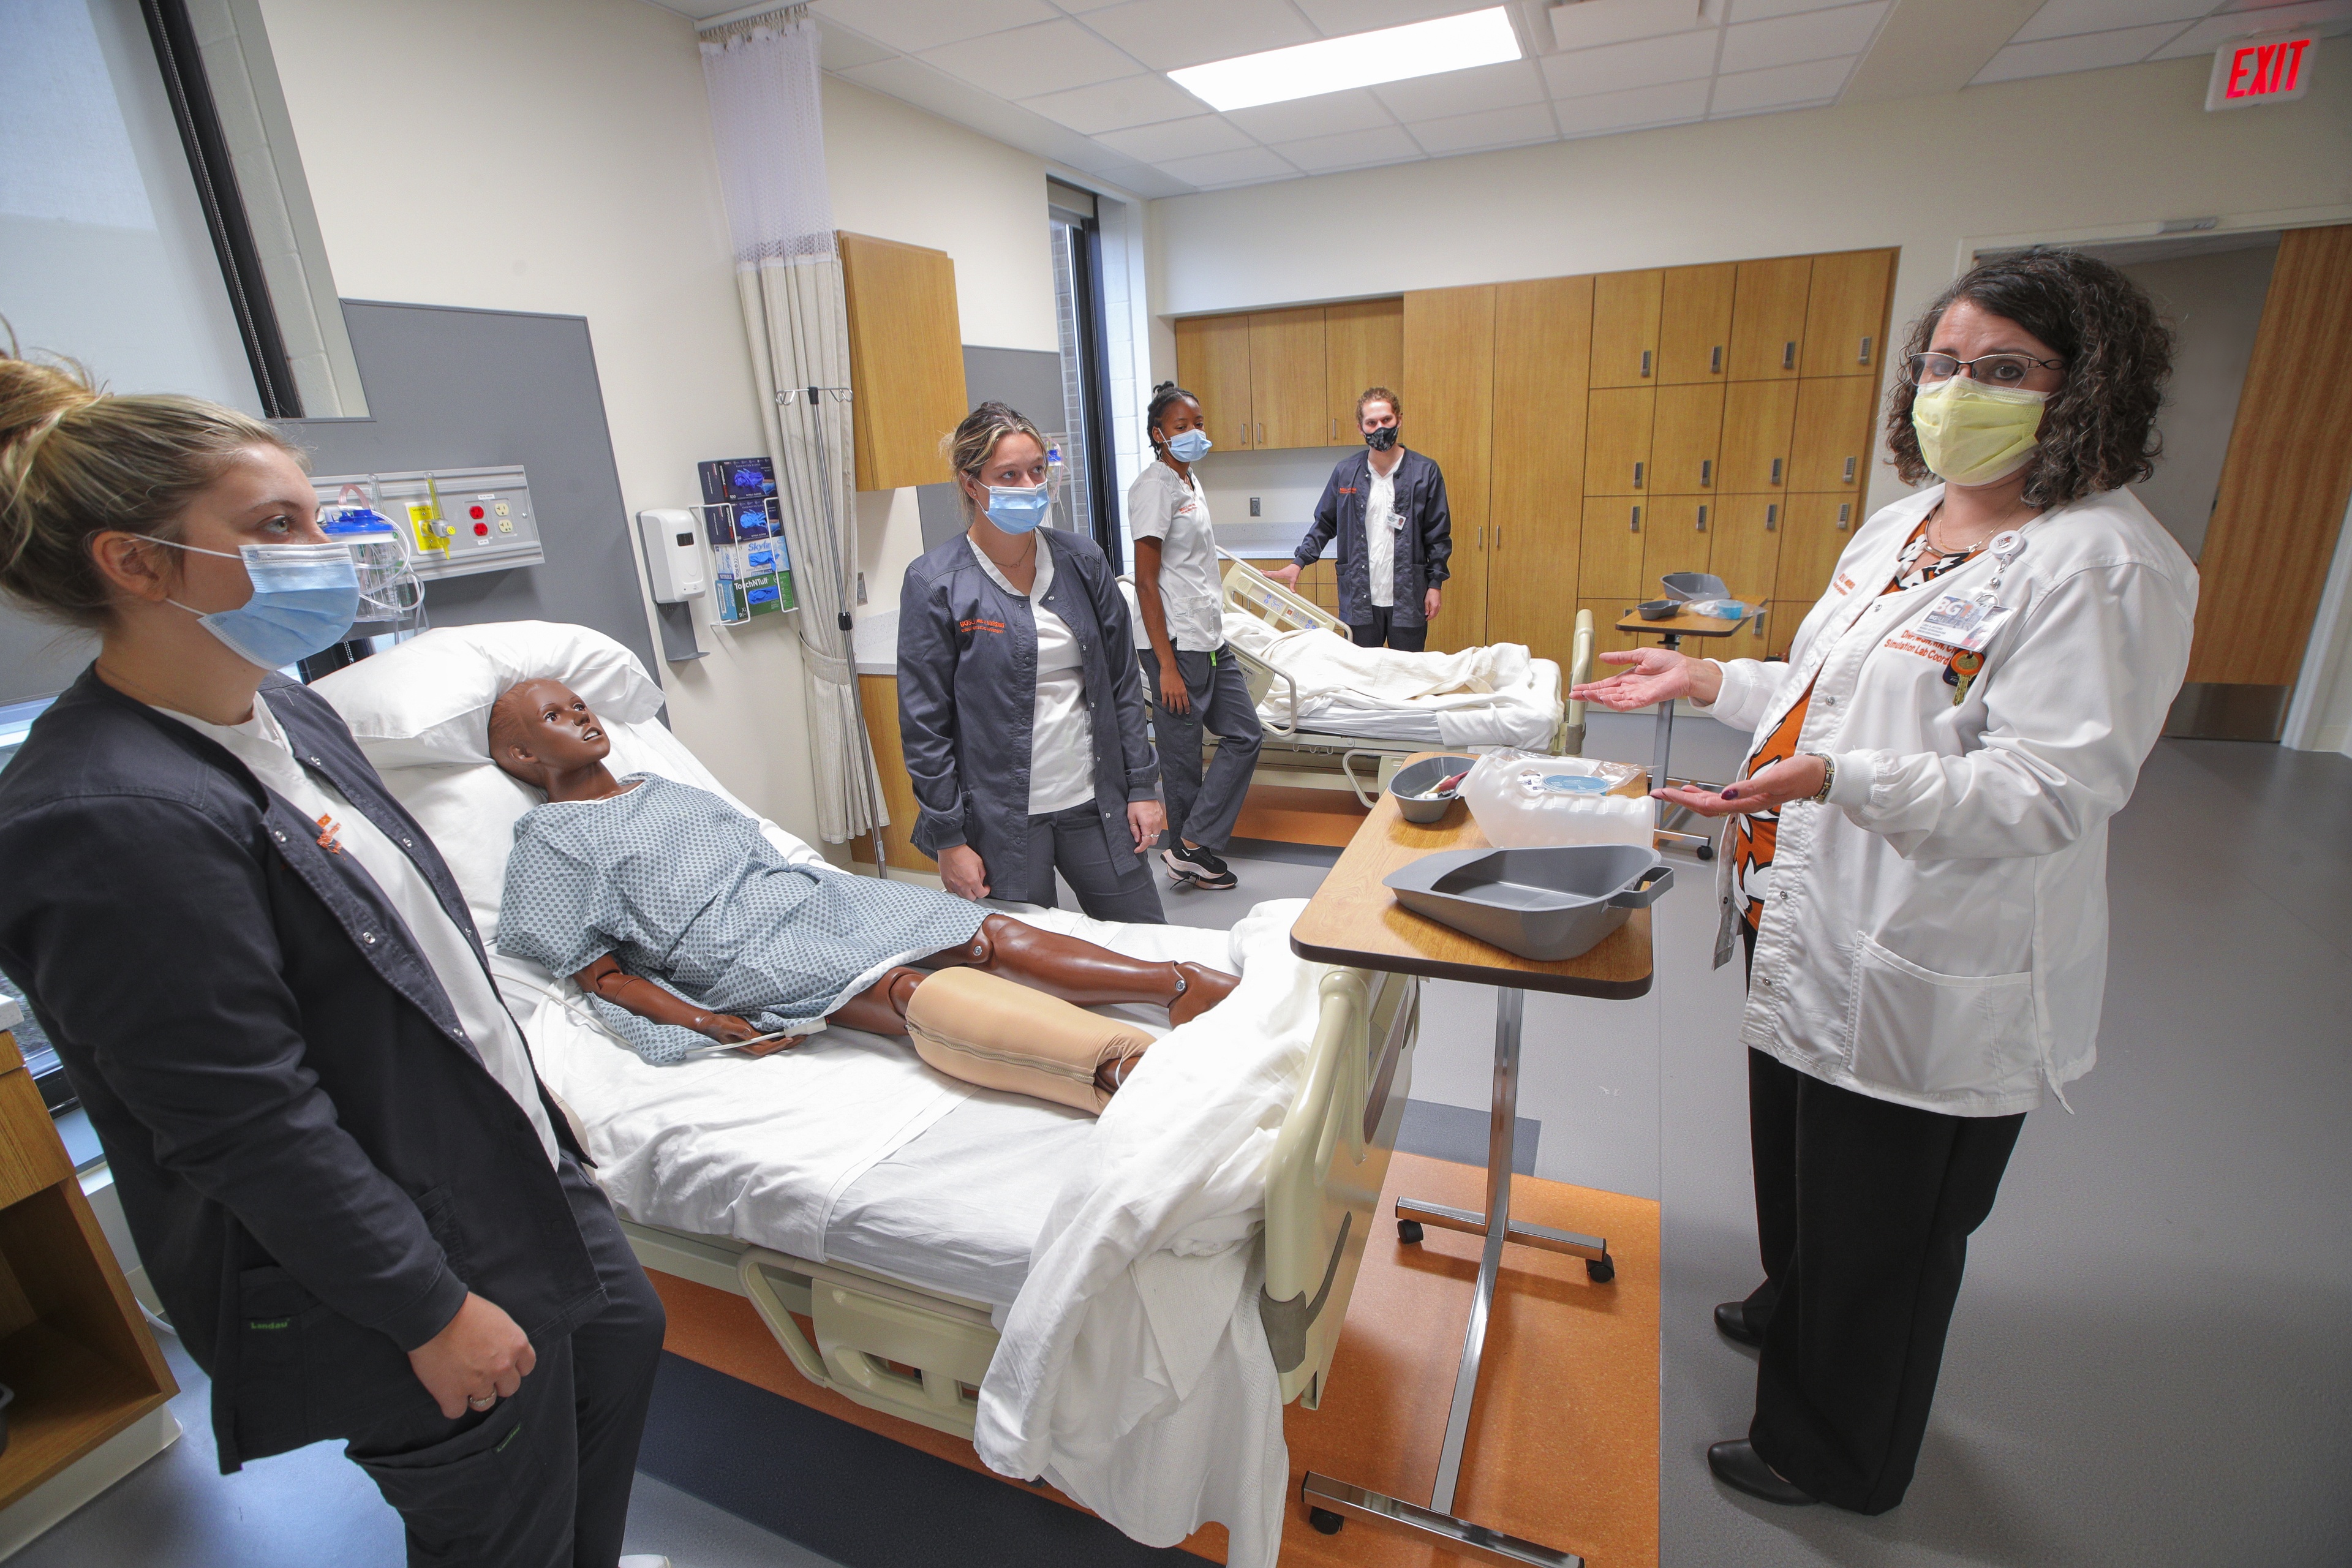 Dr. Lisa Jacobs, simulation center coordinator, works with nursing students in the skills lab.